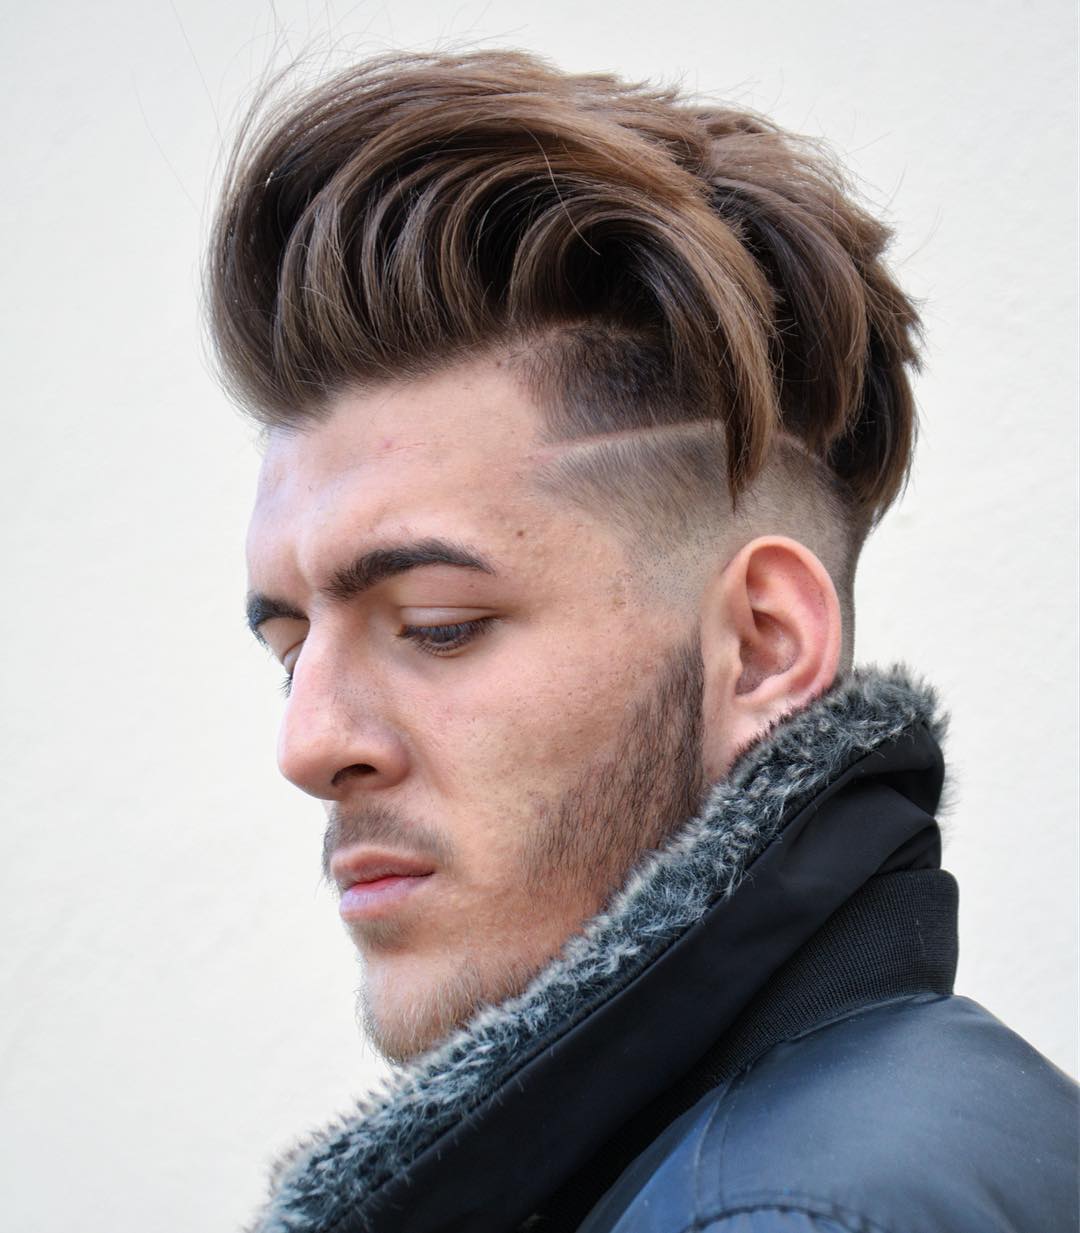 45 Cool Men's Hairstyles 2017 - Salon Collage